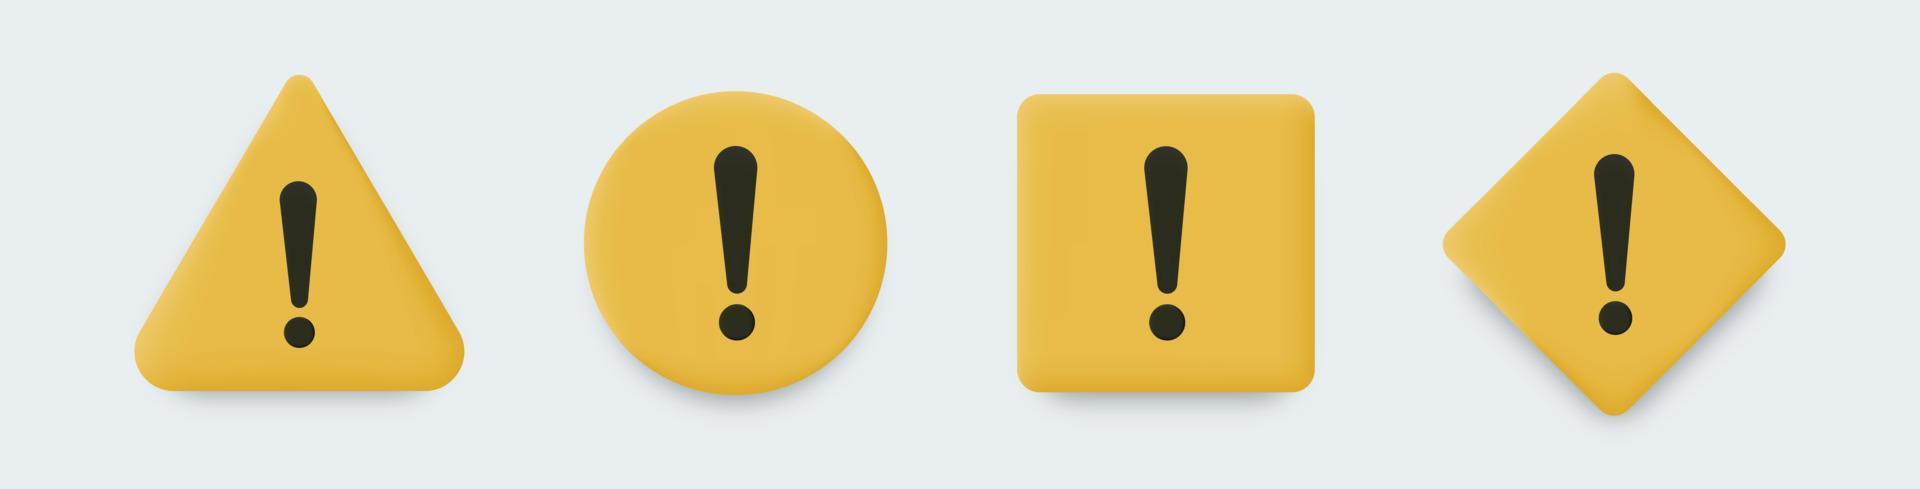 Warning message concept represented by 3d exclamation mark icon. Exclamation symbol in different shape. vector